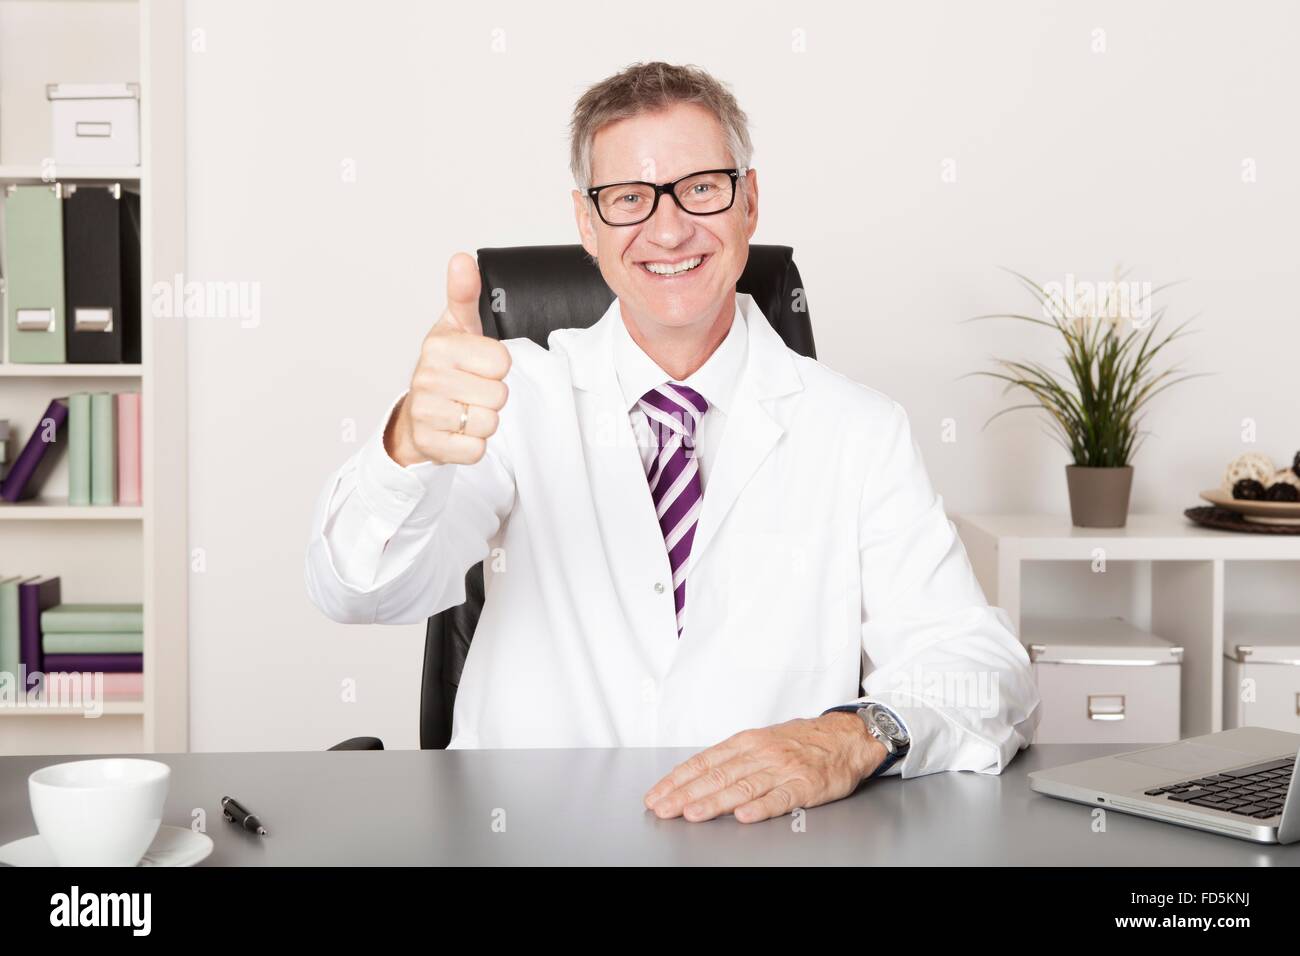 Happy Medical Doctor Showing Thumbs up at Hand Emphasizing Well Job Done Stock Photo